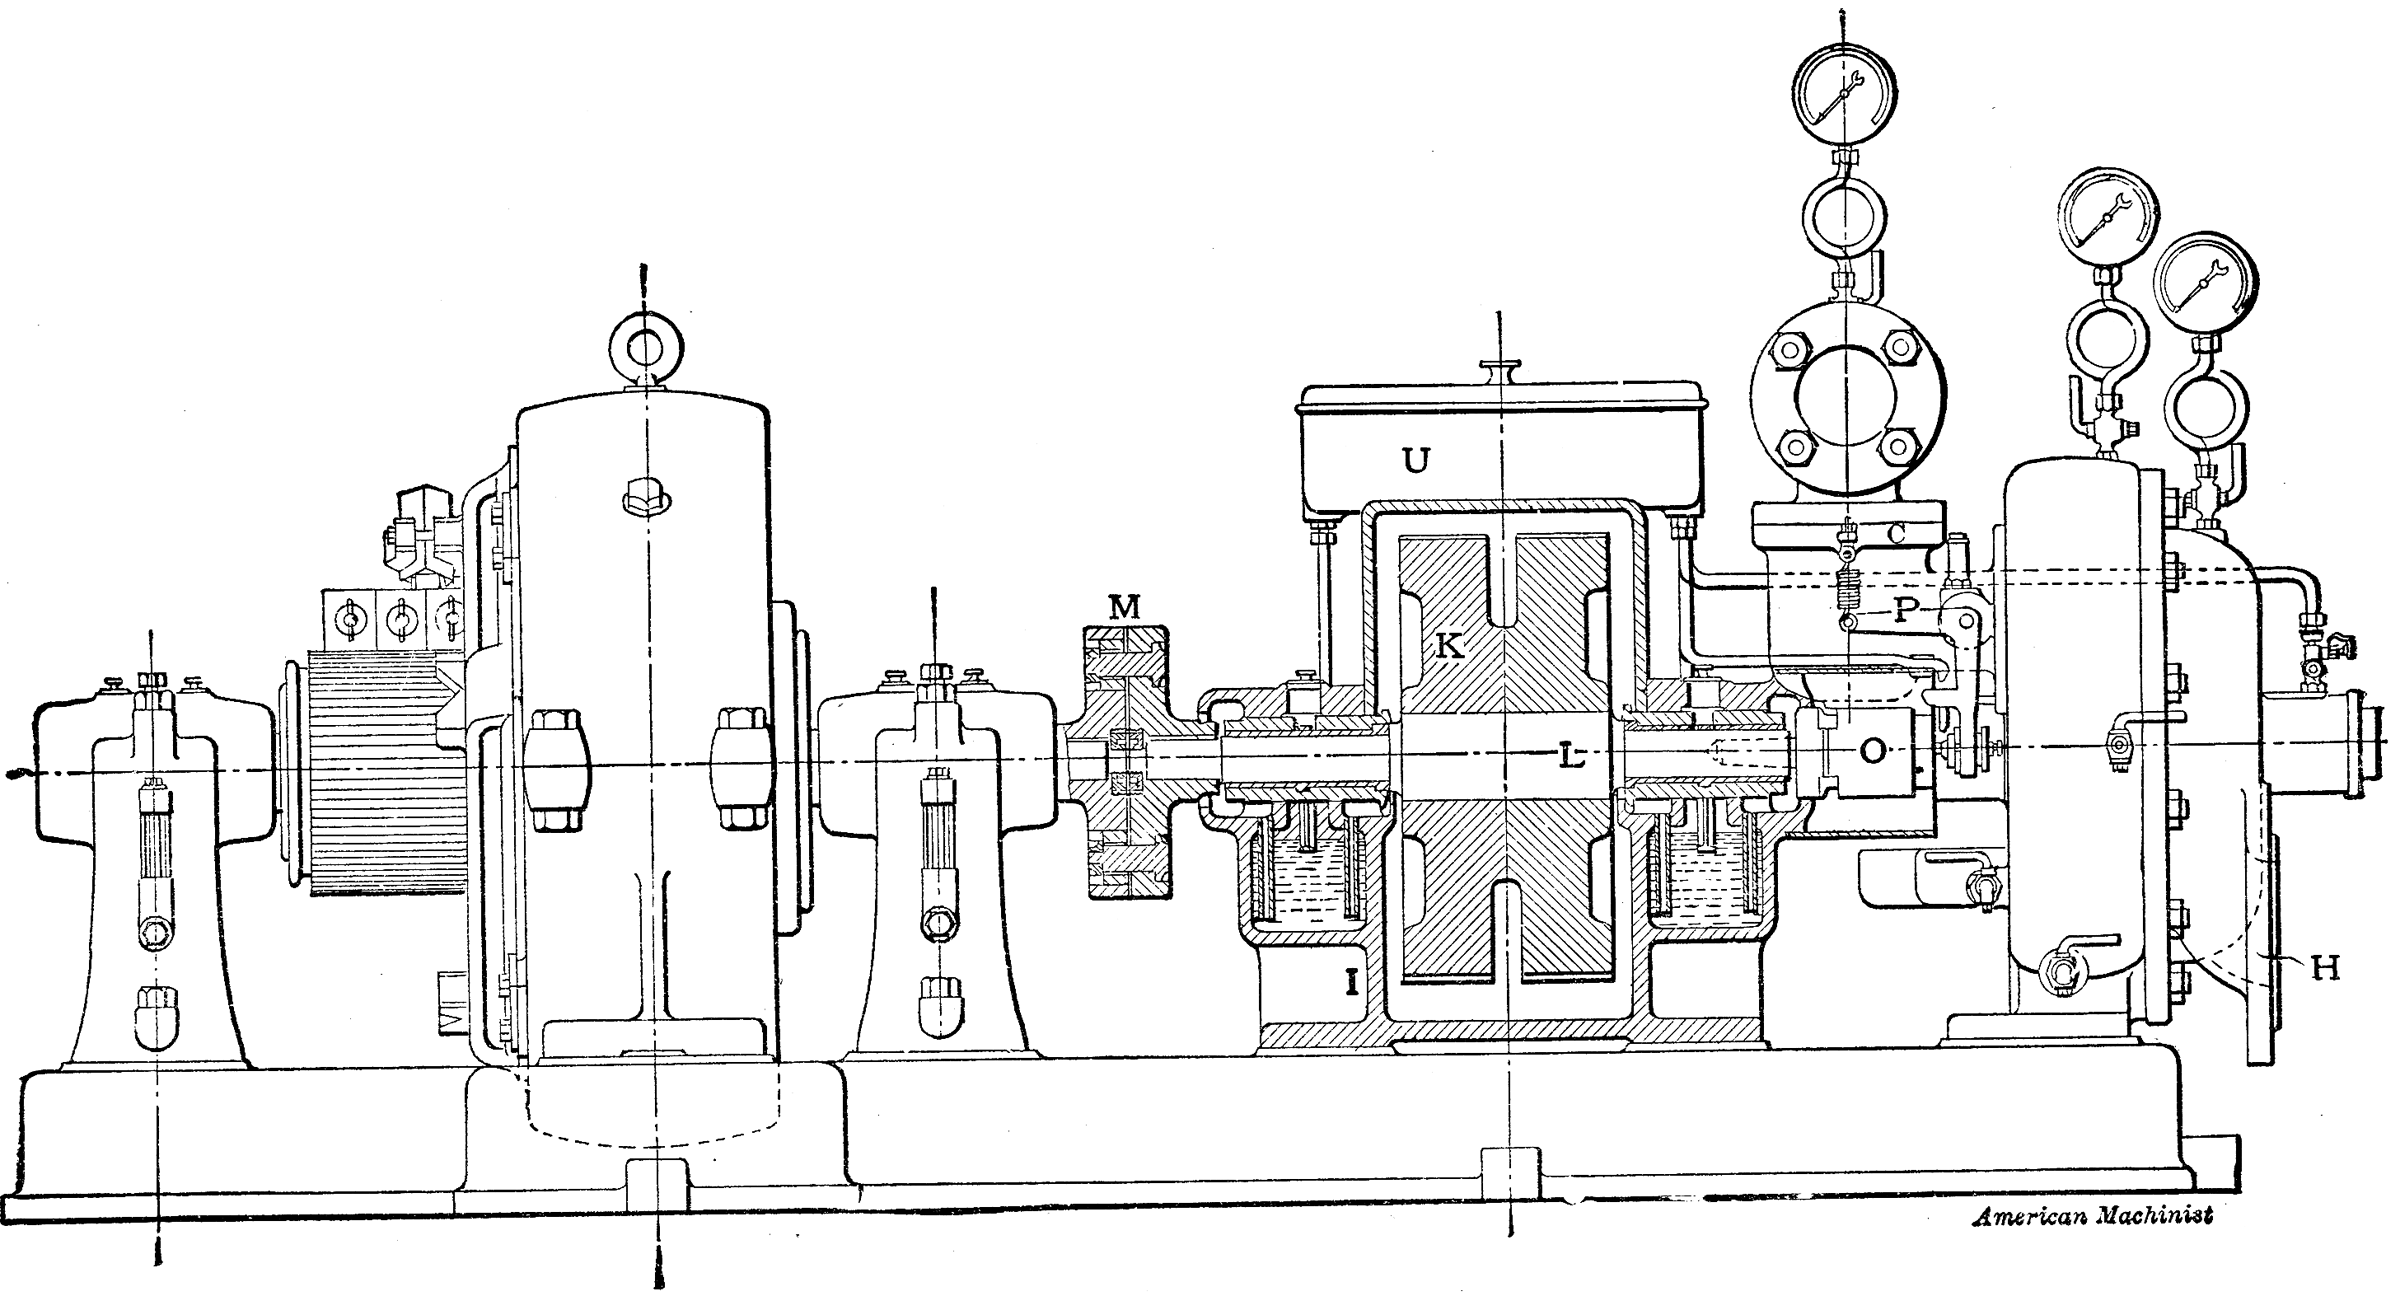 De Laval Steam Turbine Connected to Generator | ClipArt ETC circuit diagram drawing images 